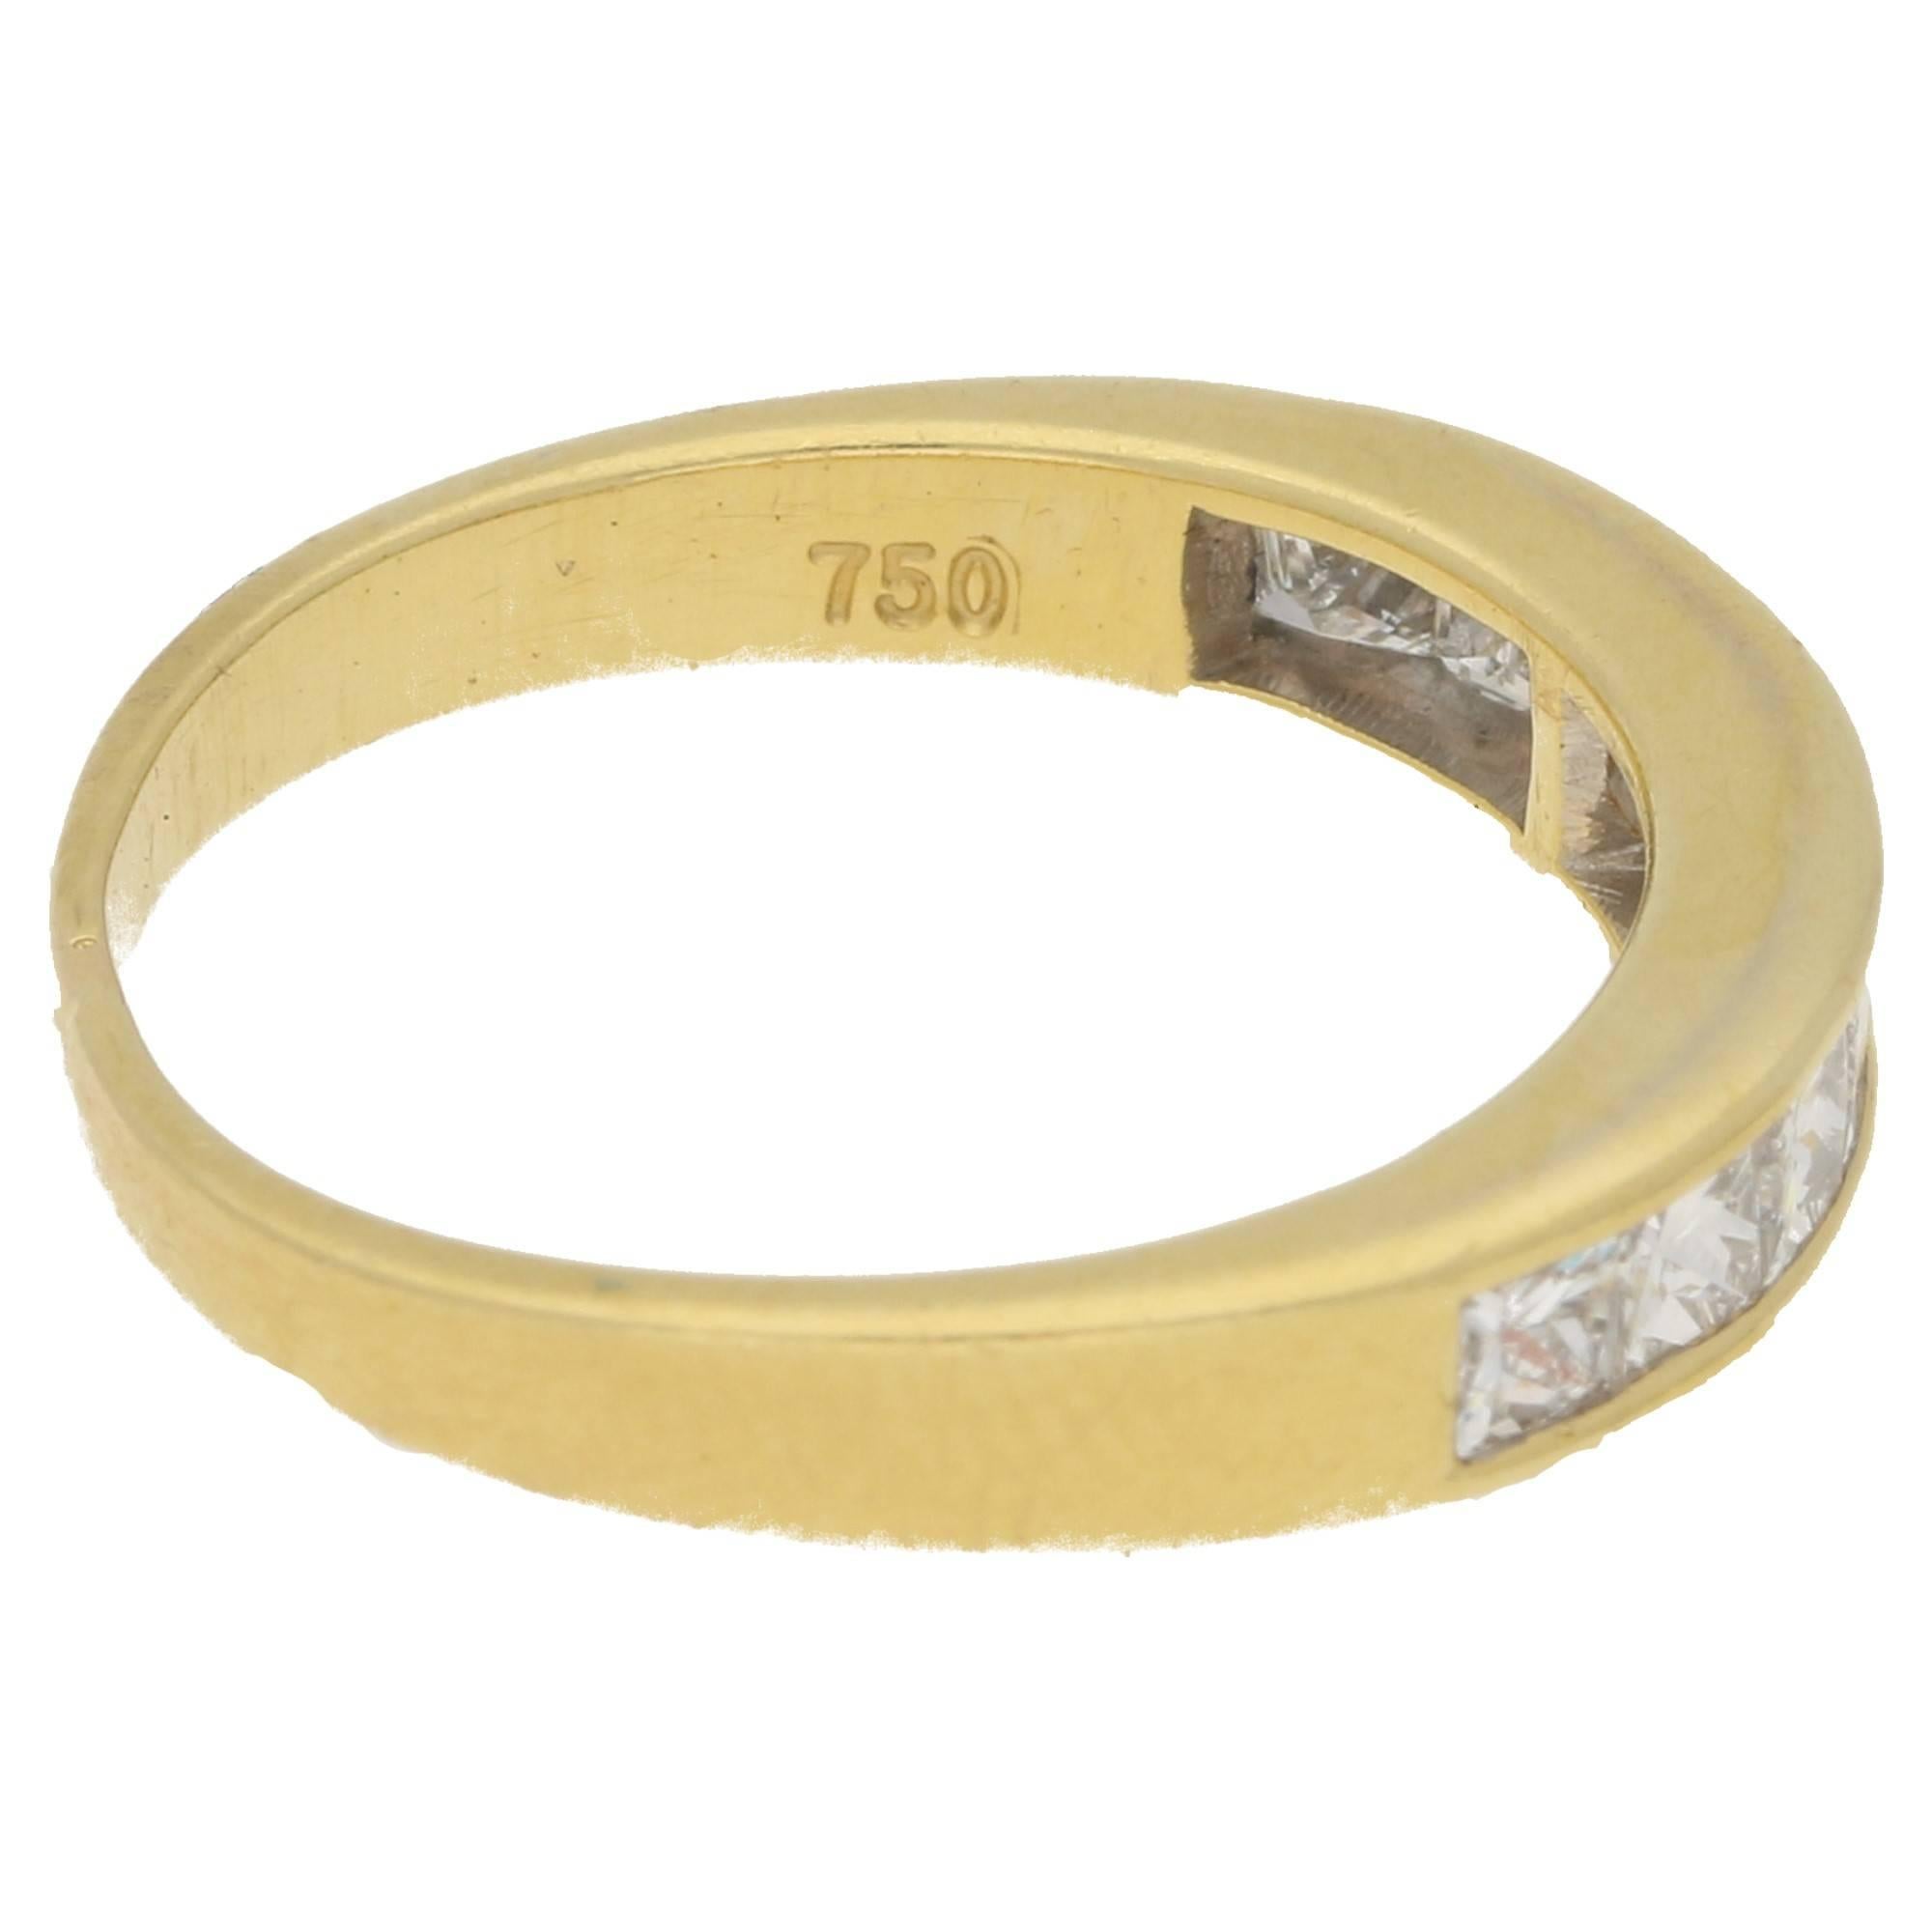 A half eternity ring with nine princess cut diamonds channel set in 18ct yellow gold. The shank tapers to a narrower reverse. Estimated total diamond weight: 0.79cts. Assessed diamond colour: H/I. Assessed diamond clarity: VS2. This ring can be